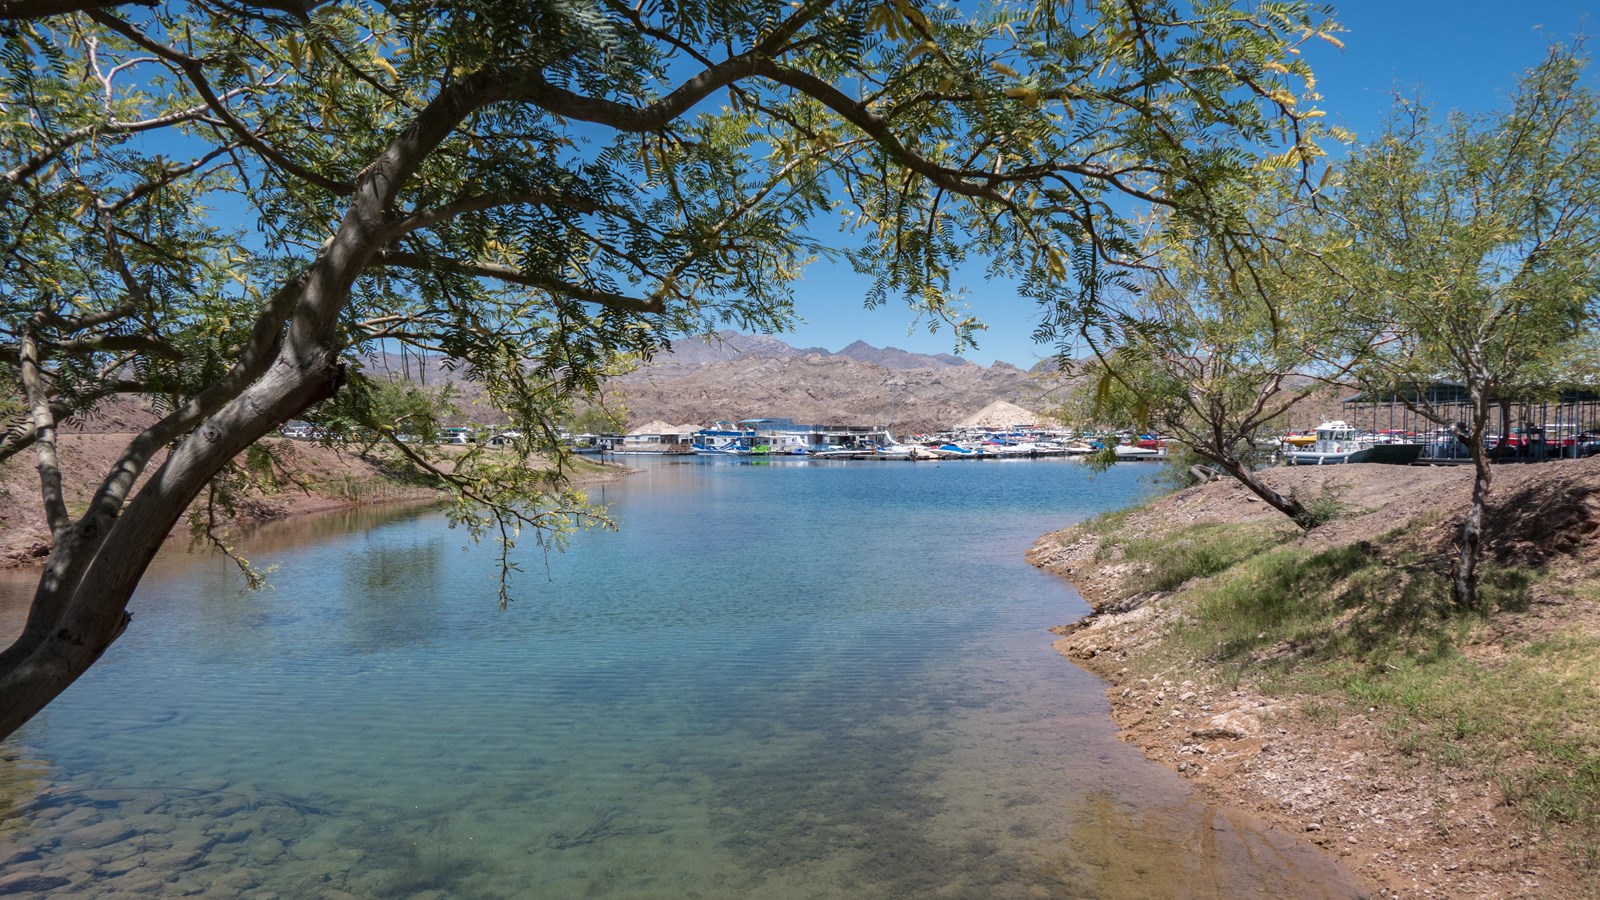 A branch overhangs over a large body of water. Boats are in the background.